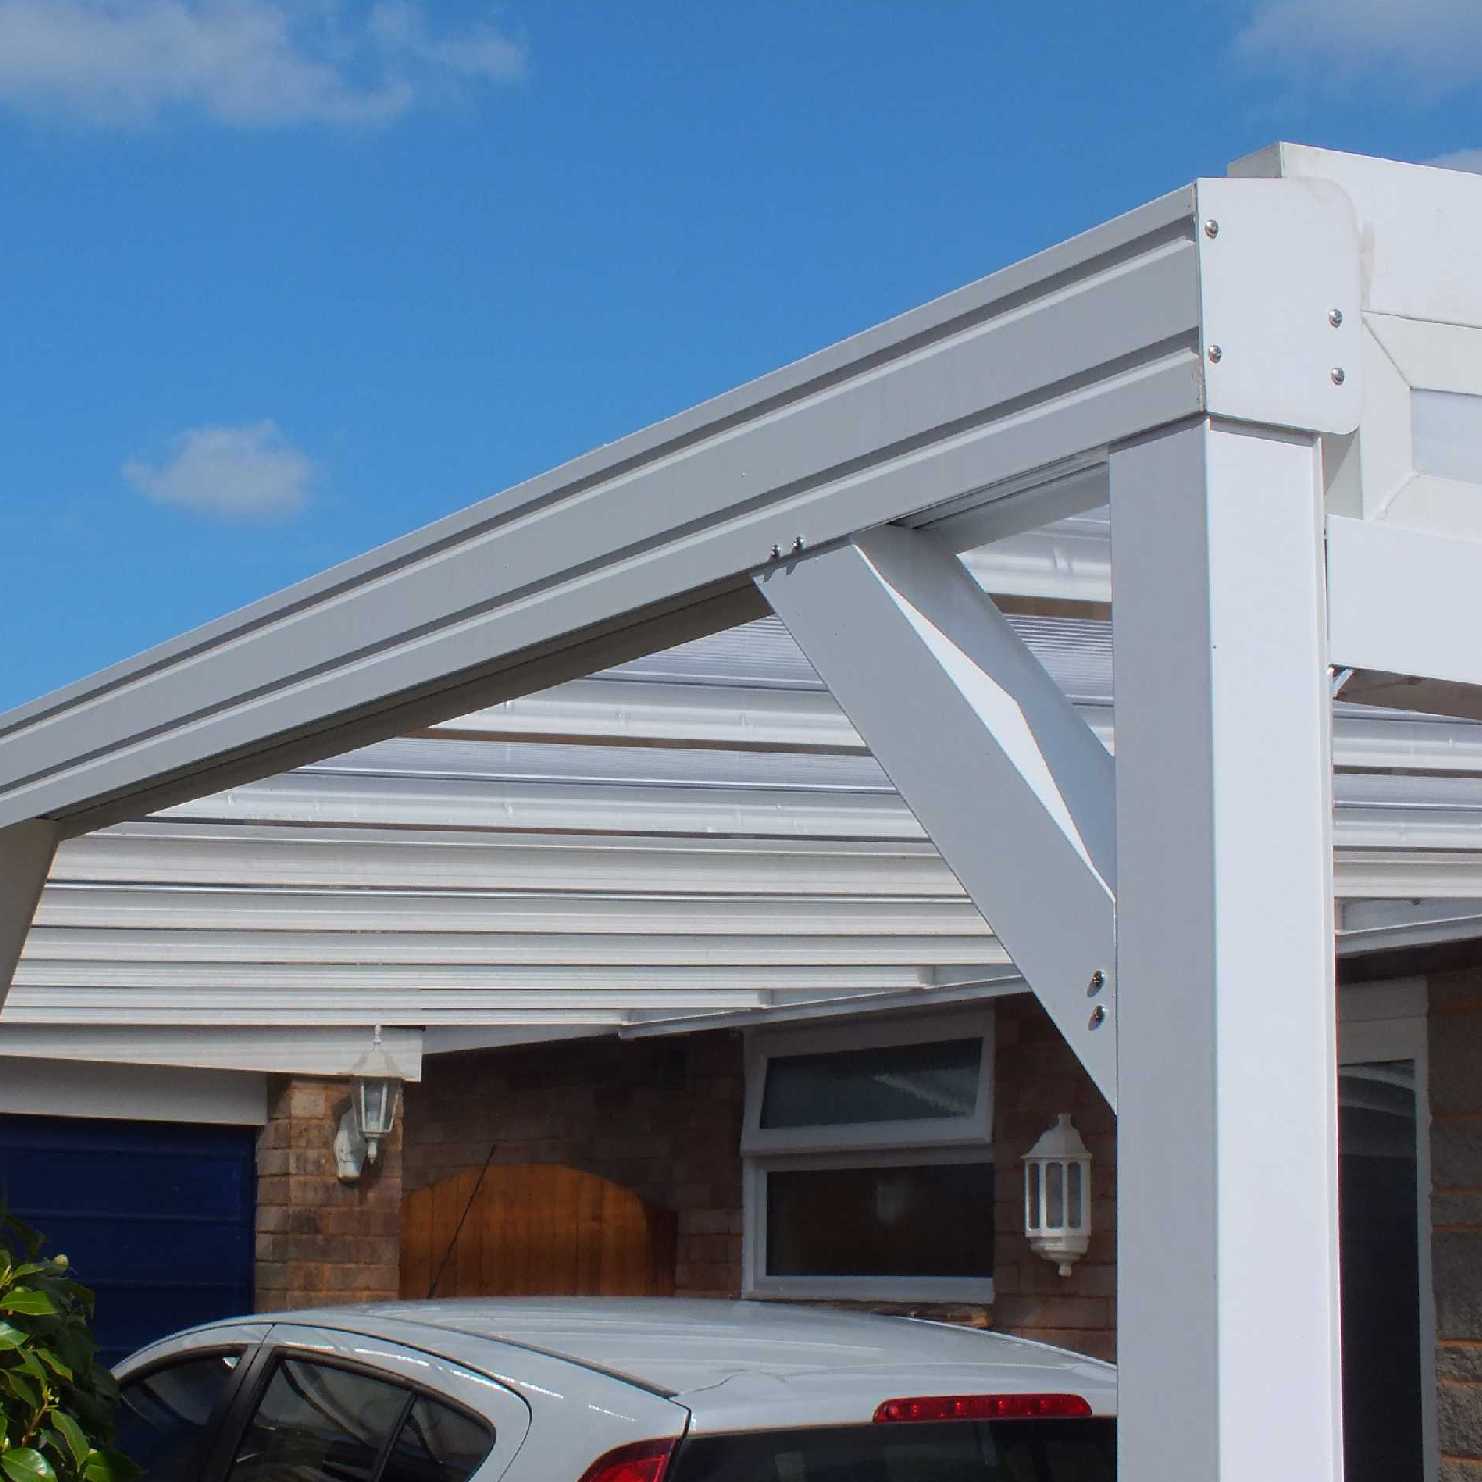 Great deals on Omega Smart Lean-To Canopy, White with 16mm Polycarbonate Glazing - 7.4m (W) x 1.5m (P), (4) Supporting Posts